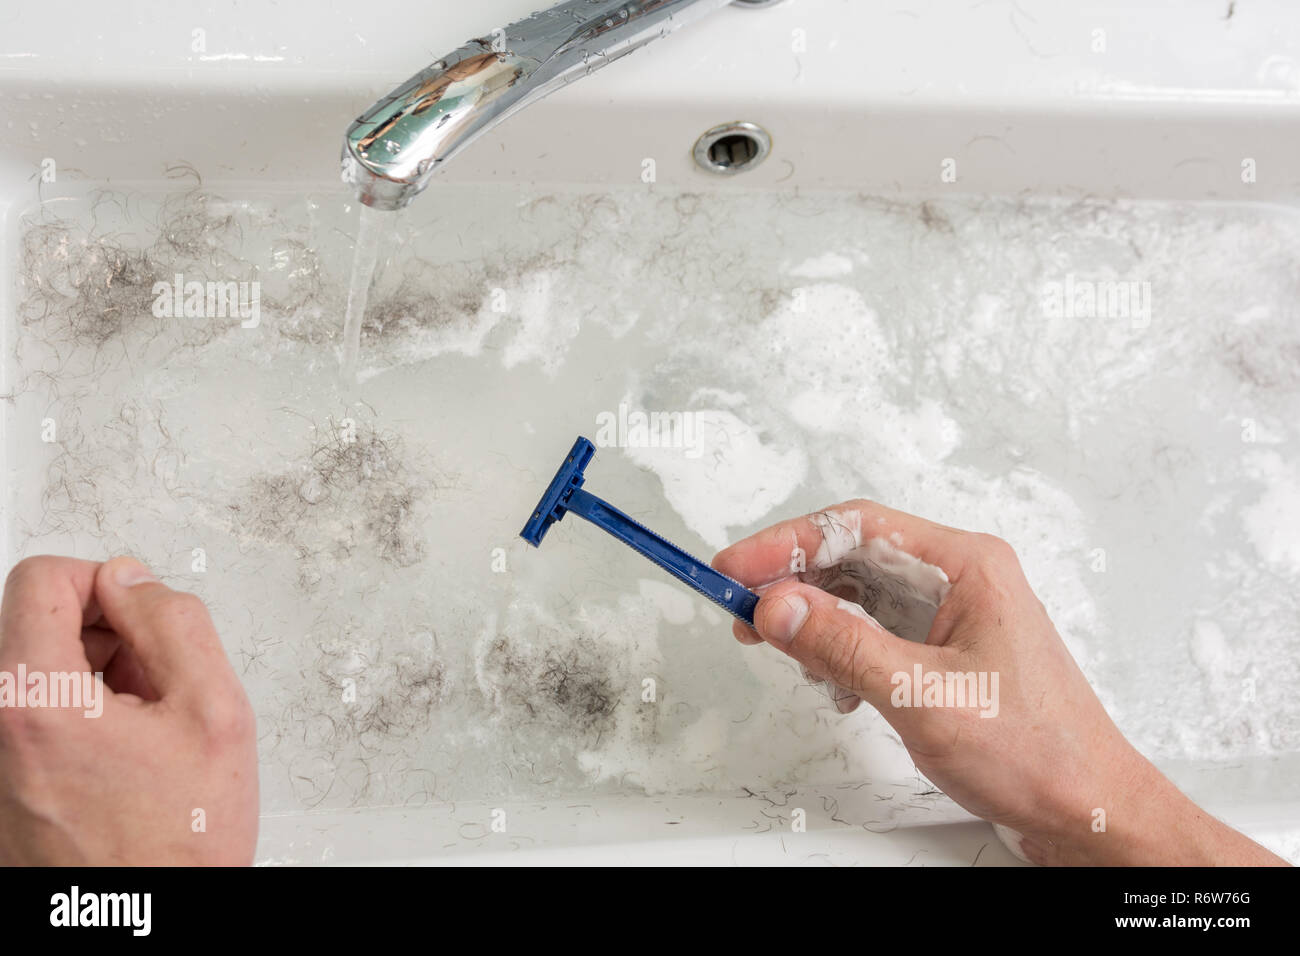 the man is shaving the view of the hands with a razor and the wash basin with dirty water R6W76G